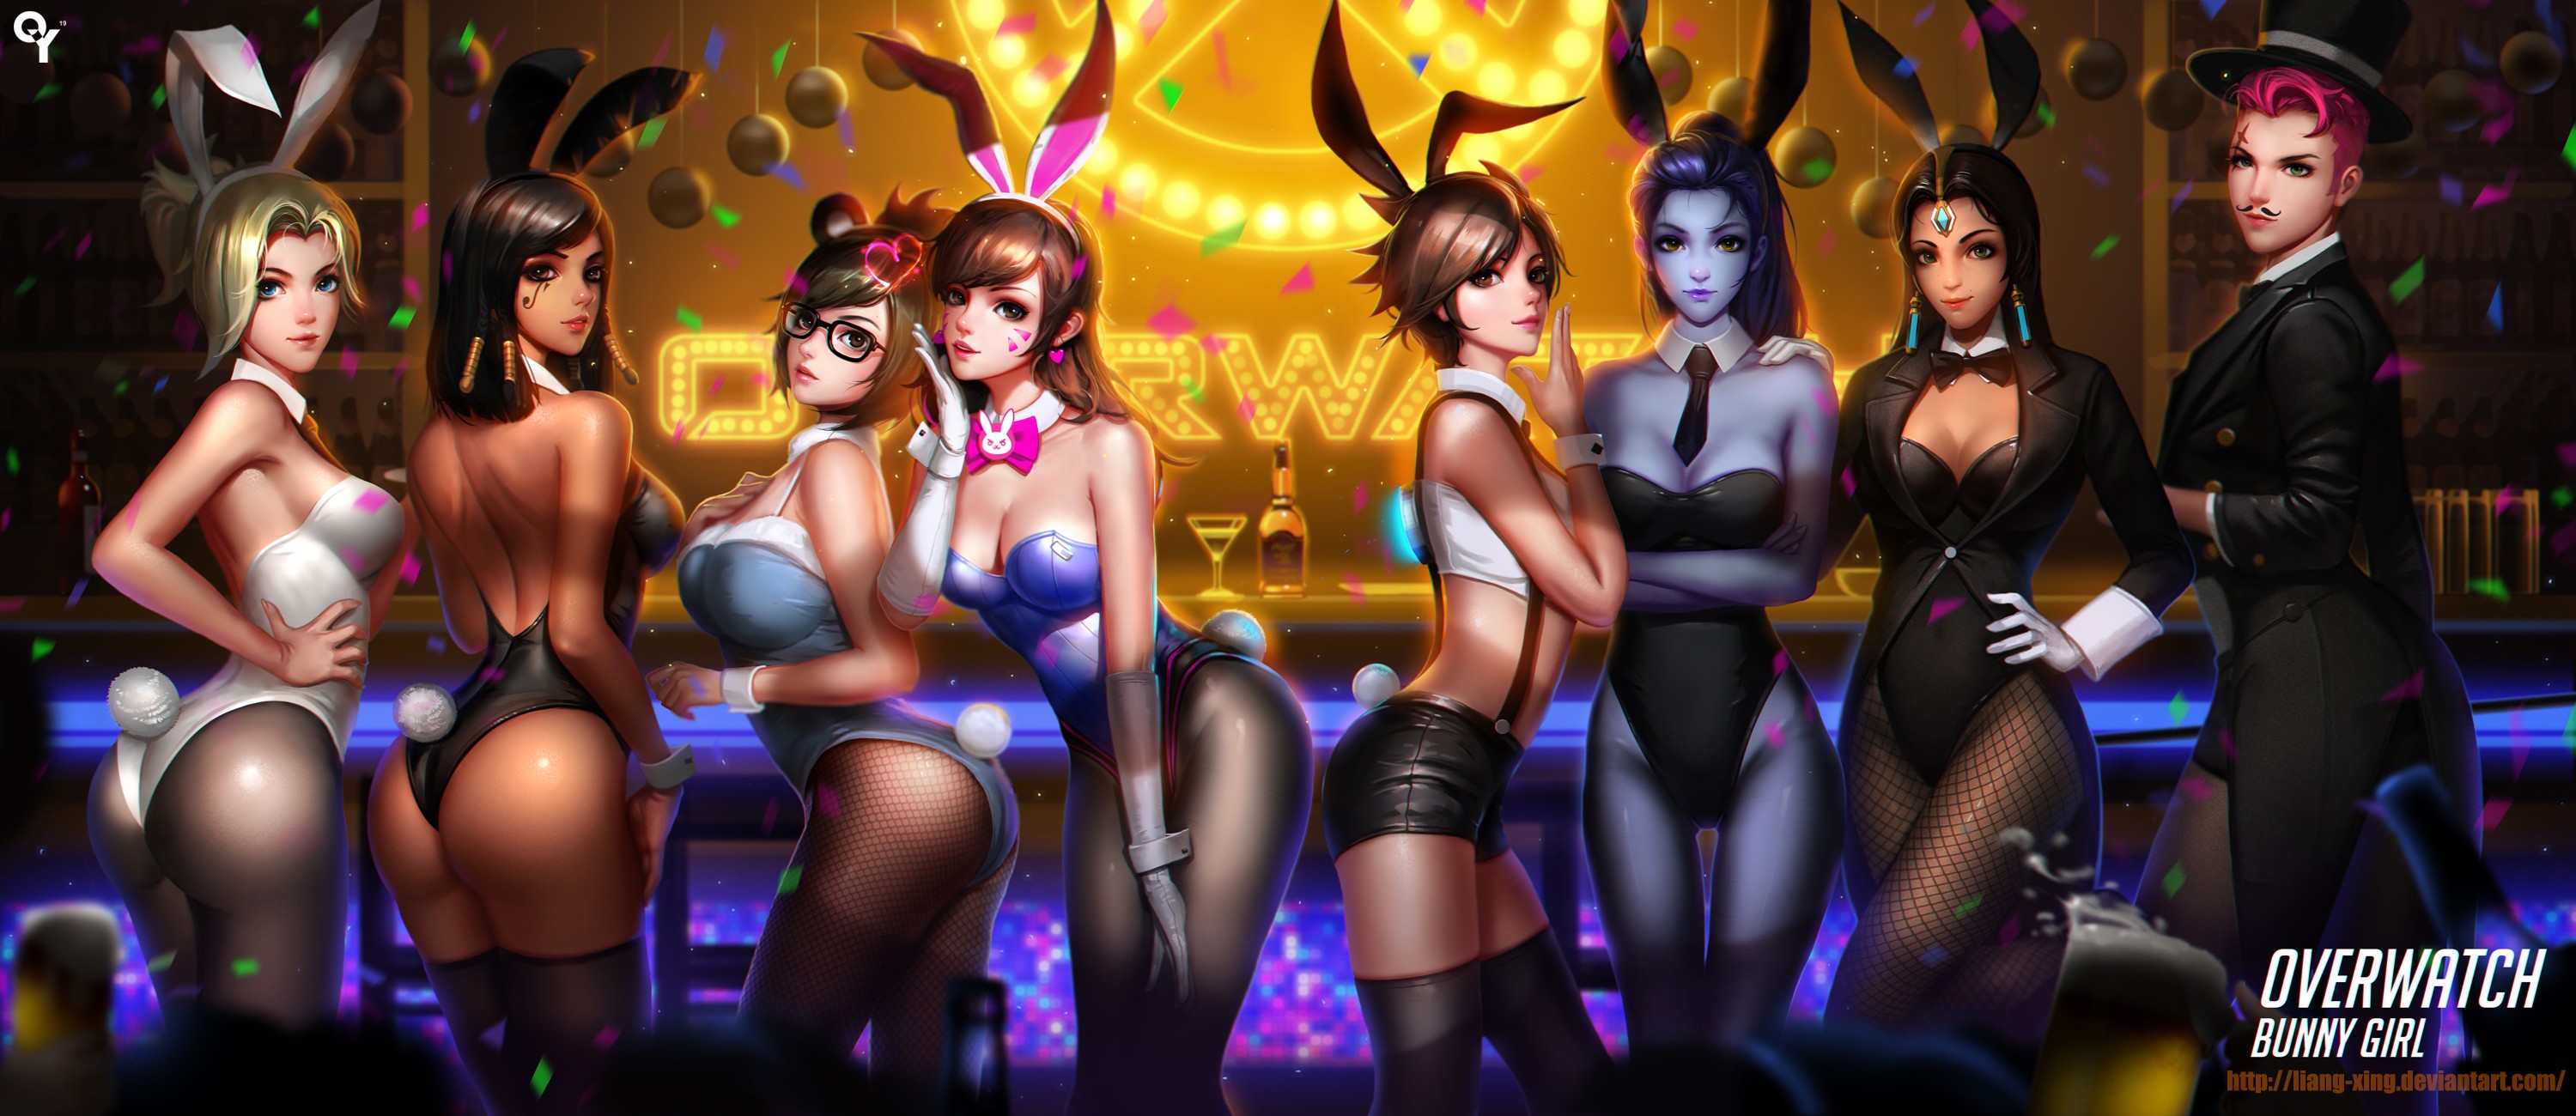 General 3000x1300 Widowmaker (Overwatch) bunny girl bunny ears Mercy (Overwatch) bare midriff bunny suit sleeveless cuffs Jason Liang video game characters women bodysuit Symmetra (Overwatch) Pharah (Overwatch) Tracer (Overwatch) Zarya (Overwatch) ass Overwatch short hair open shirt PC gaming long hair Mei (Overwatch) thigh-highs bunny tail standing video game girls fishnet group of women thighs D.Va (Overwatch) watermarked top hat digital art video games arched back boobs